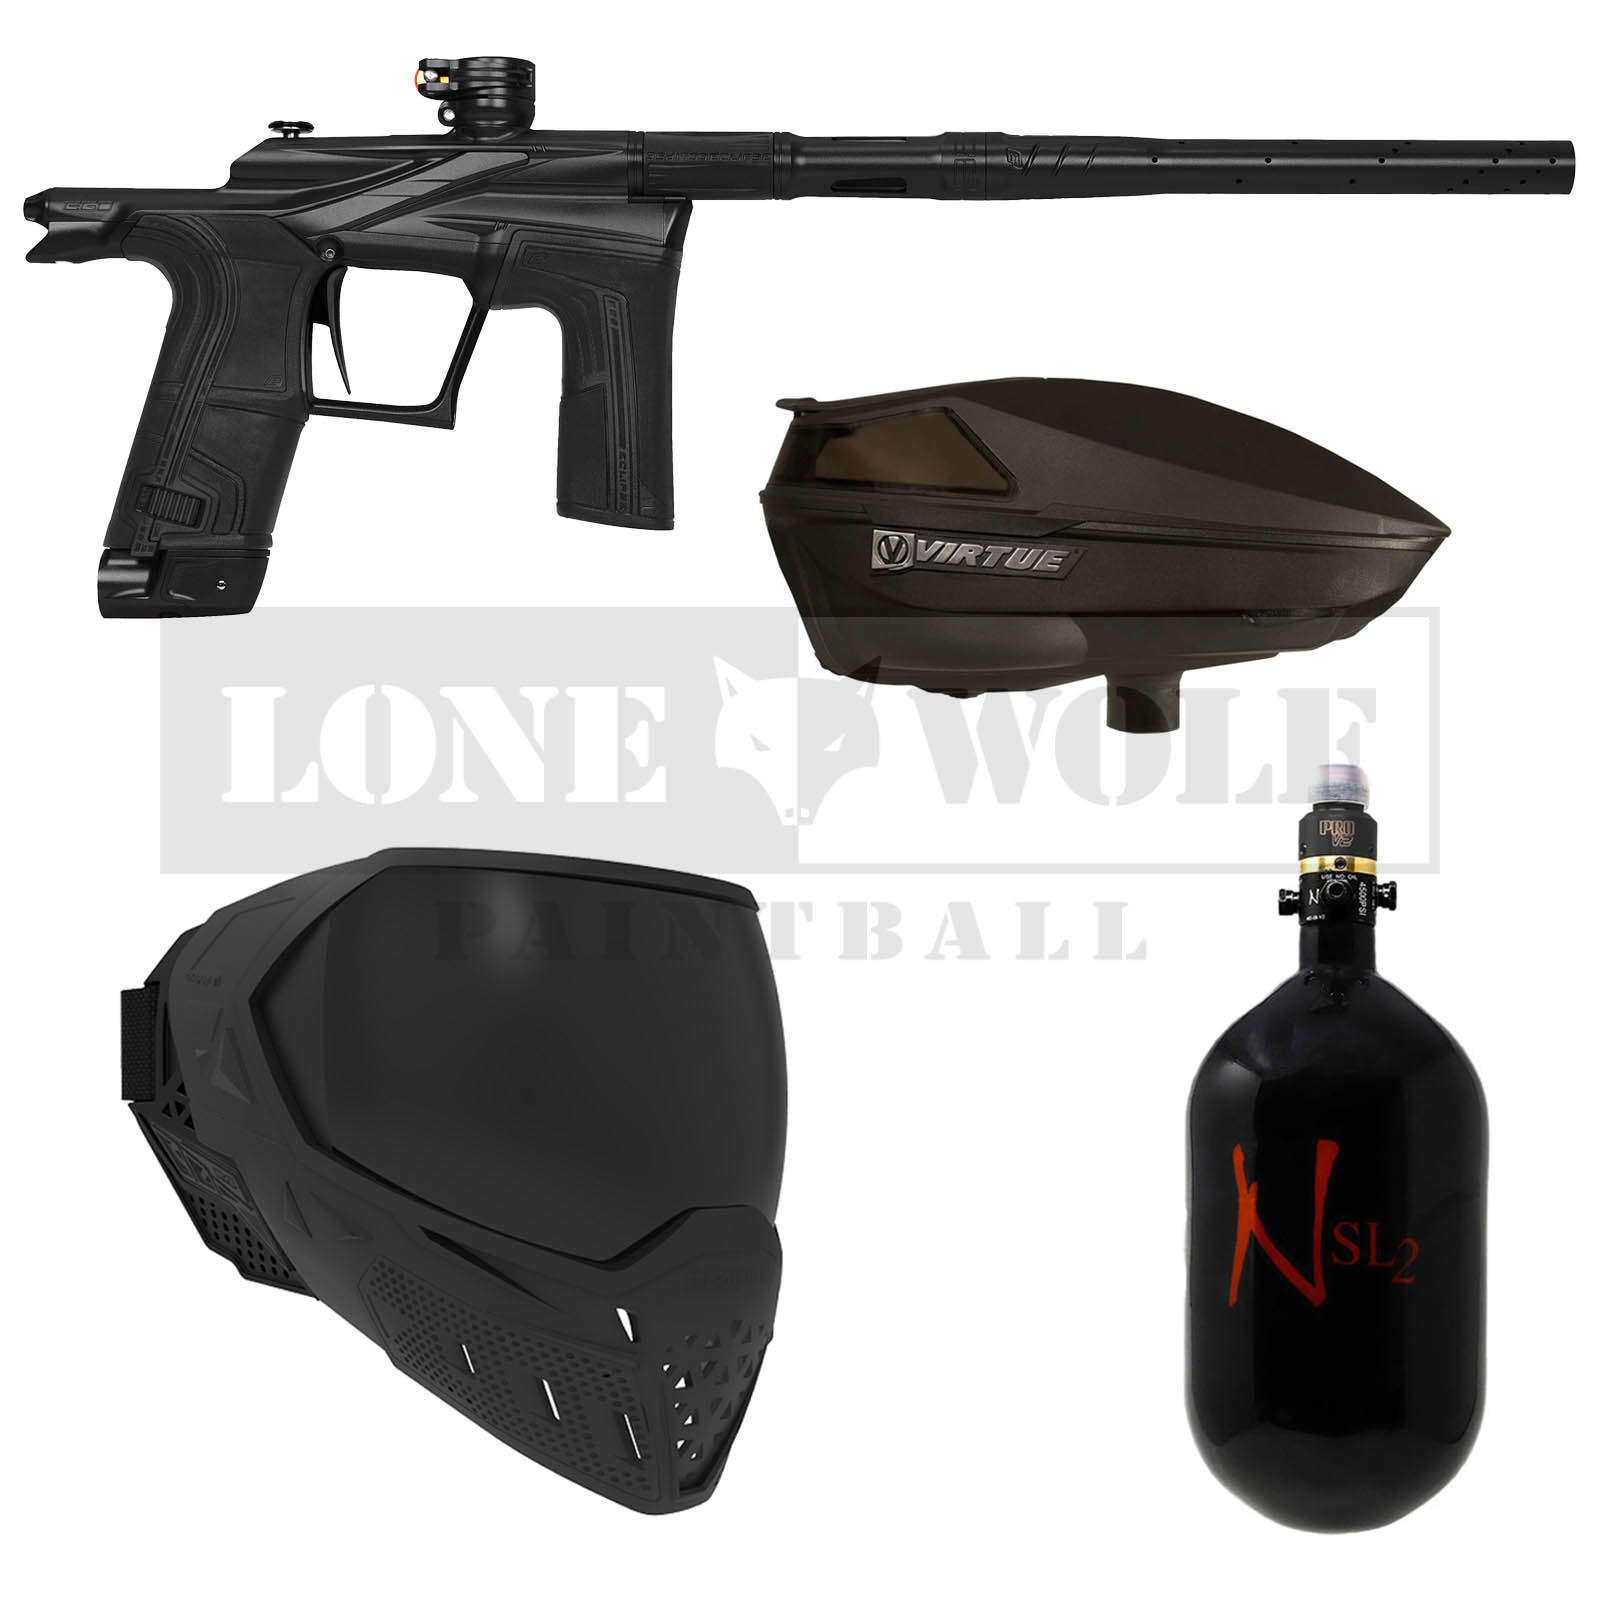 Planet Eclipse Ego LV1.6 Paintball Gun - Midnight Series - Review